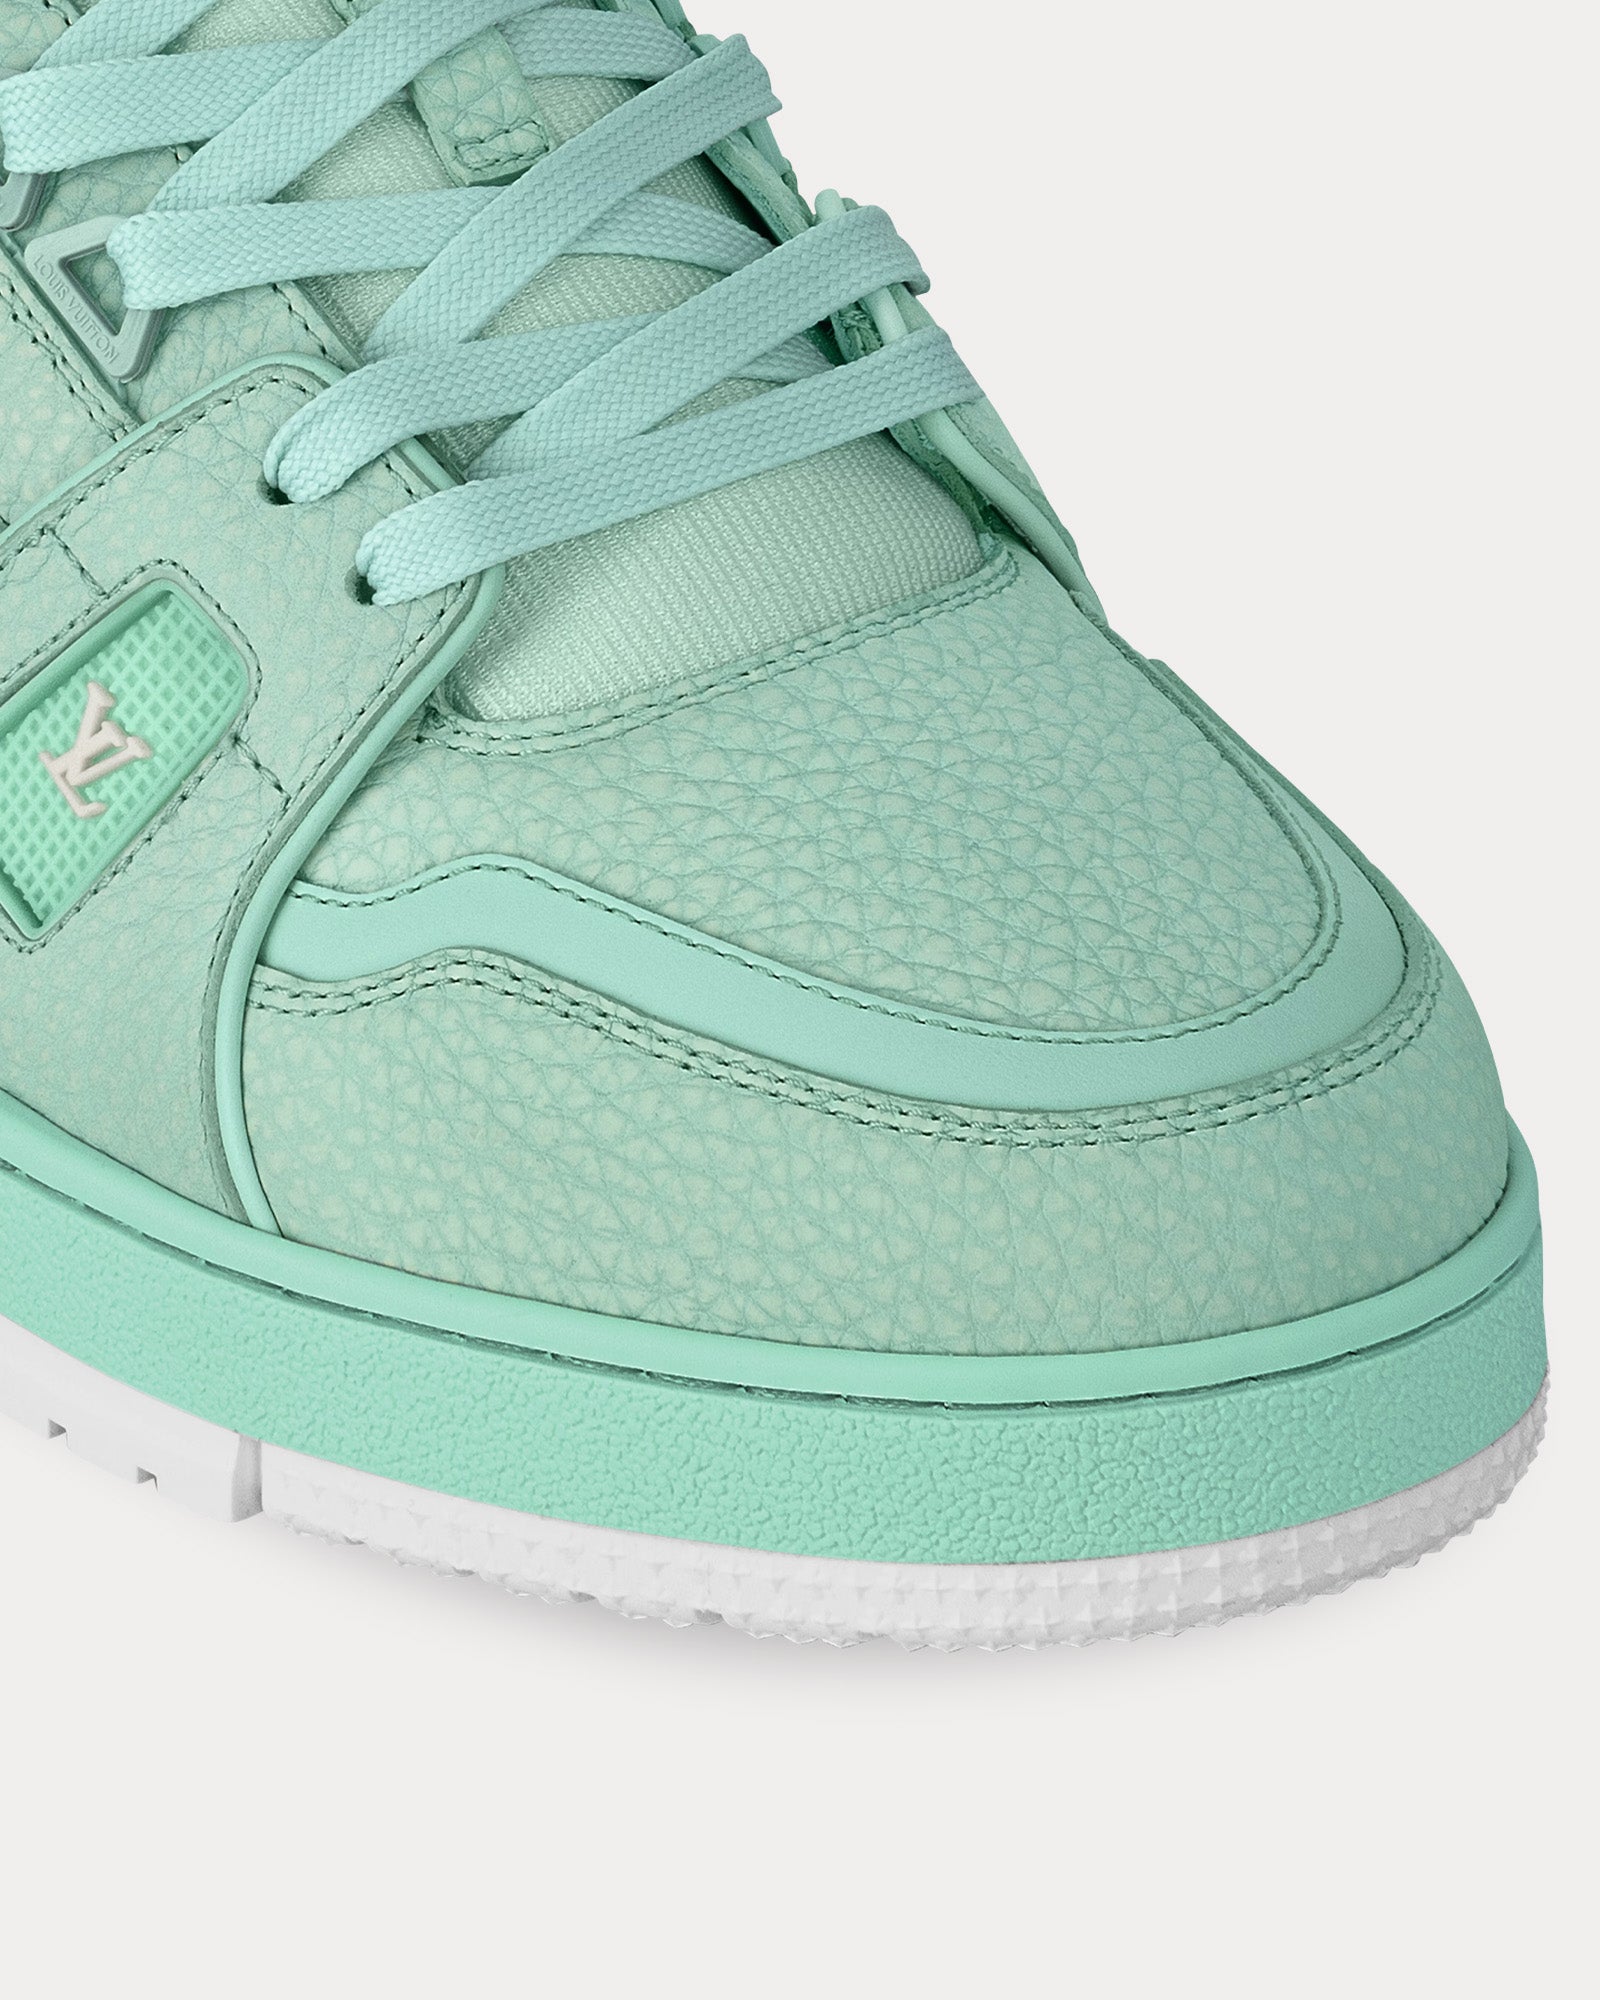 Louis Vuitton - LV Trainer Grained Calf Leather Pastel Green Low Top Sneakers